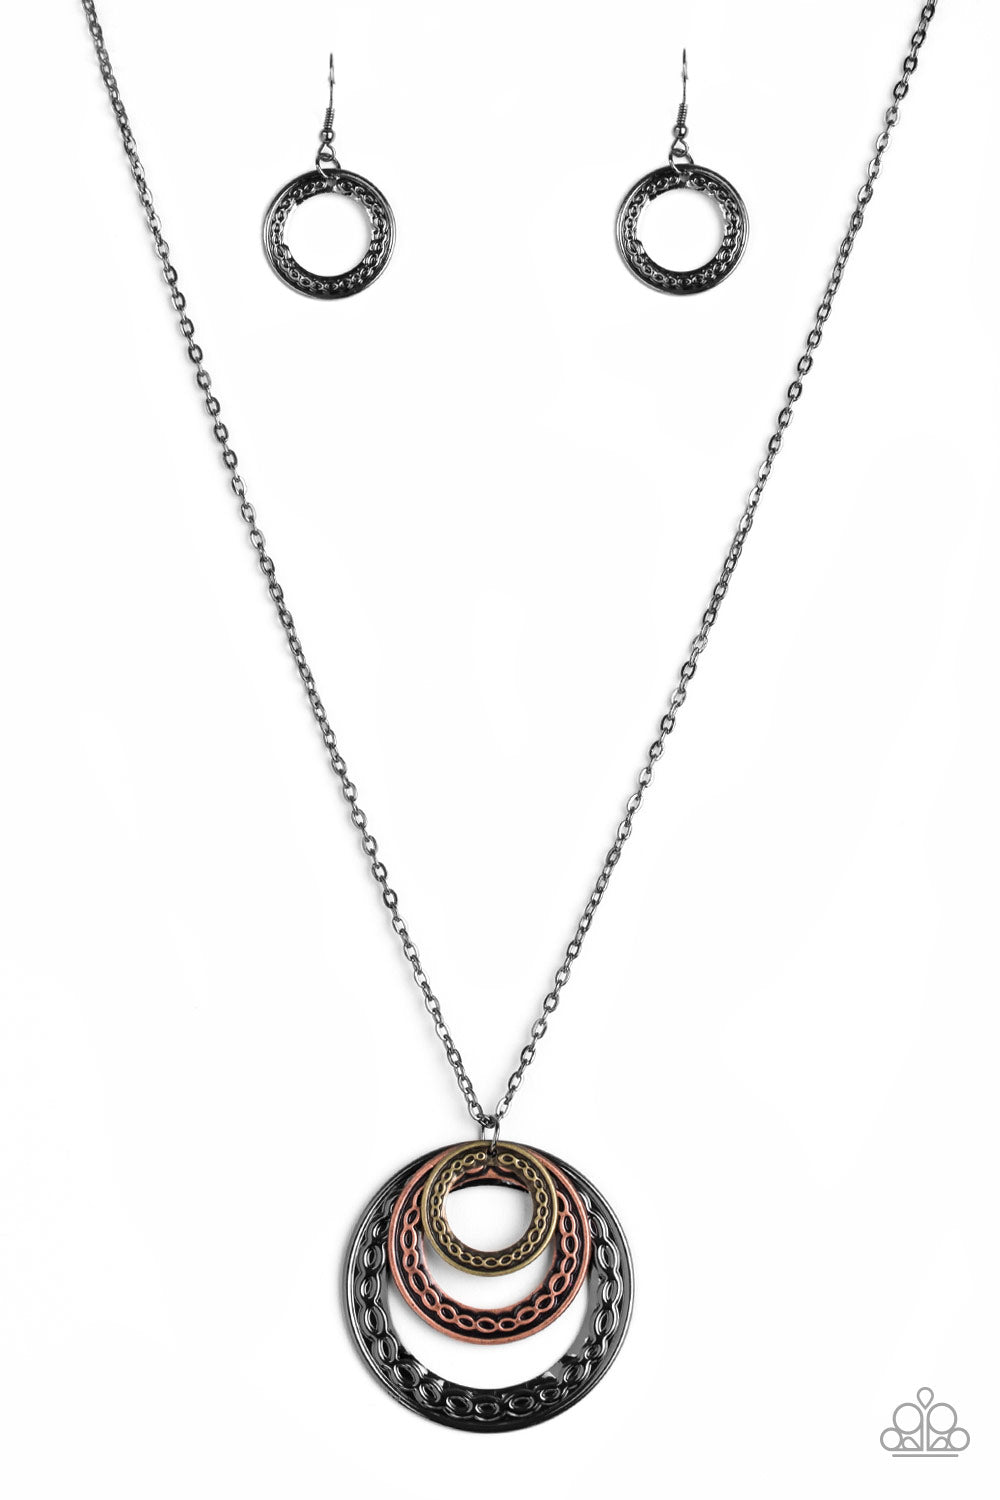 Savagely She-Wolf - Multi Metal necklace